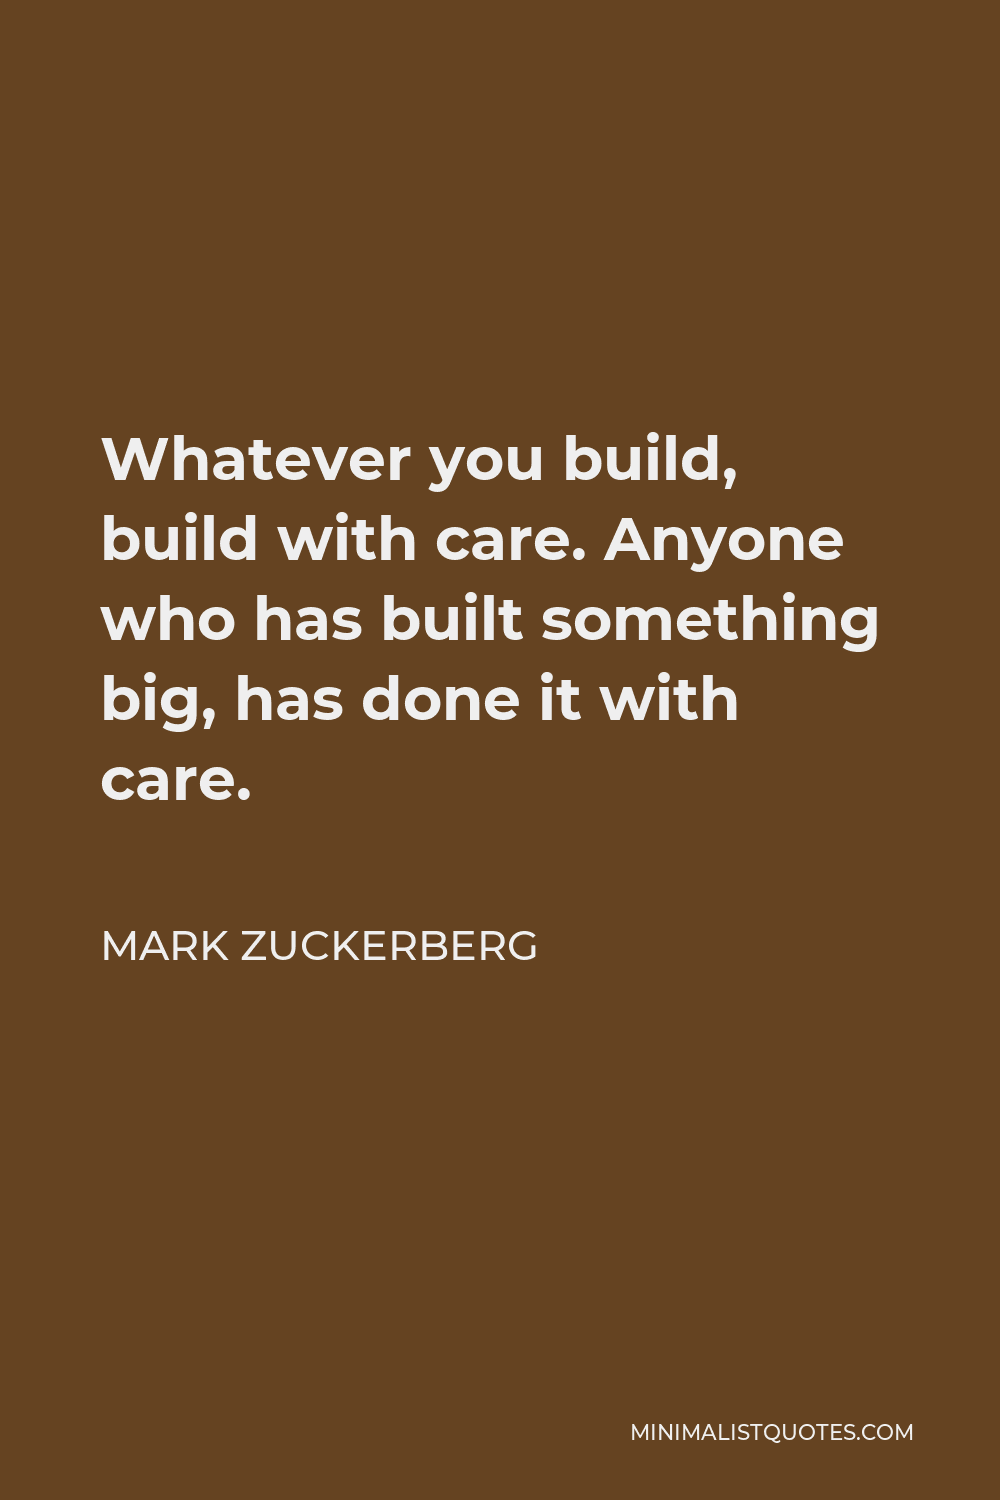 Mark Zuckerberg Quote - Whatever you build, build with care. Anyone who has built something big, has done it with care.